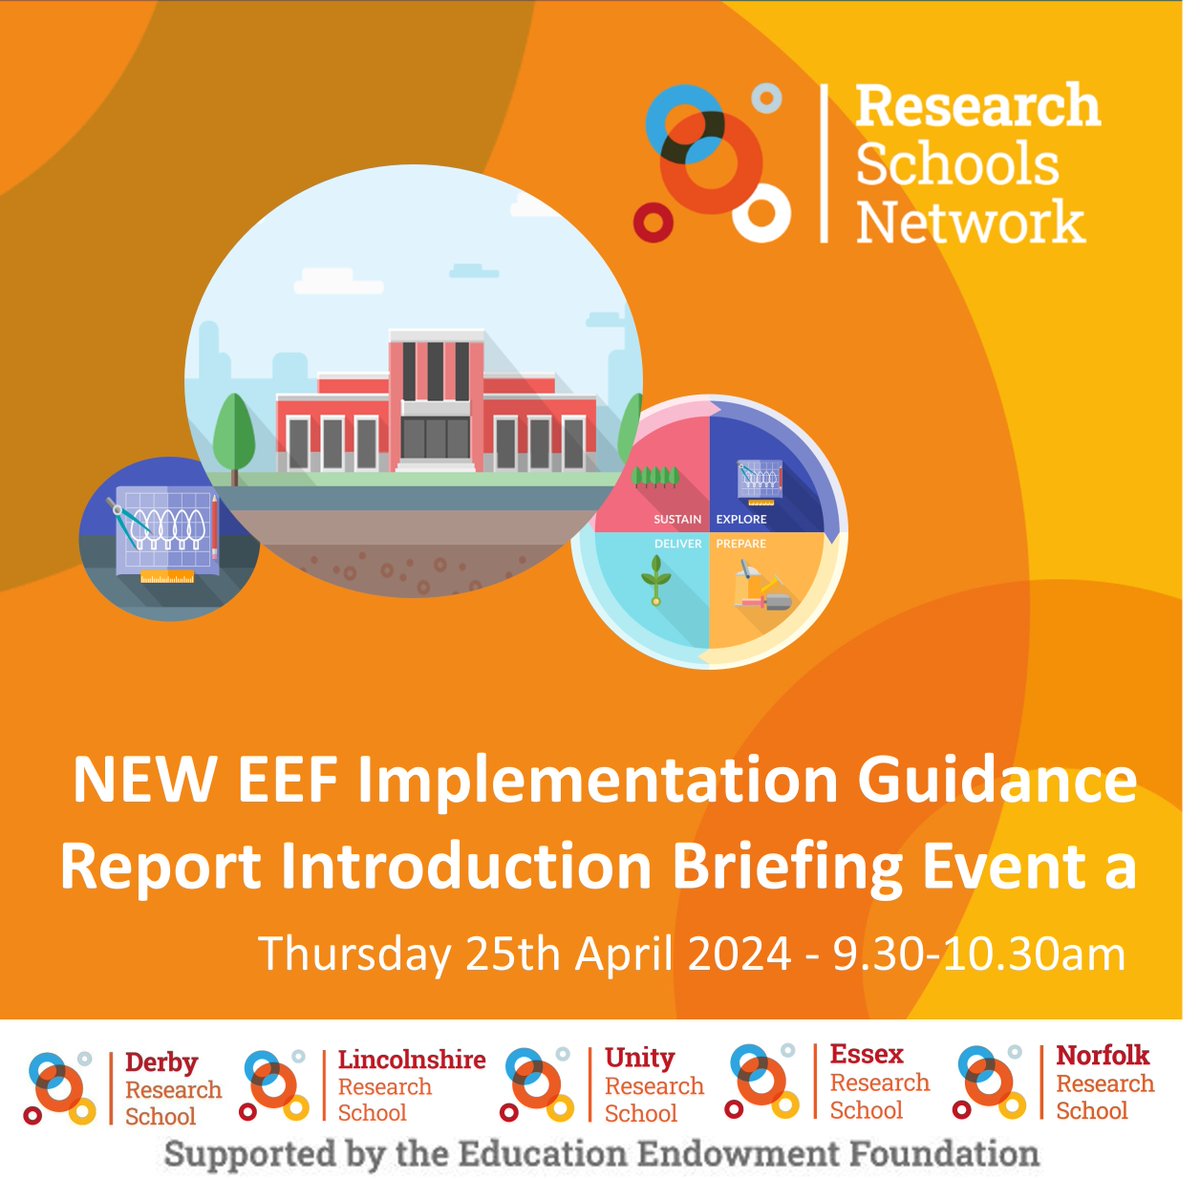 We are eagerly anticipating the arrival of the new edition of the EEF's 'A School's Guide to Implementation'. To celebrate, we will be sharing a walk through introduction of the new guidance report. Follow the 🔗to book- tinyurl.com/k4jxb6zt. #ResearchSchoolsNetwork